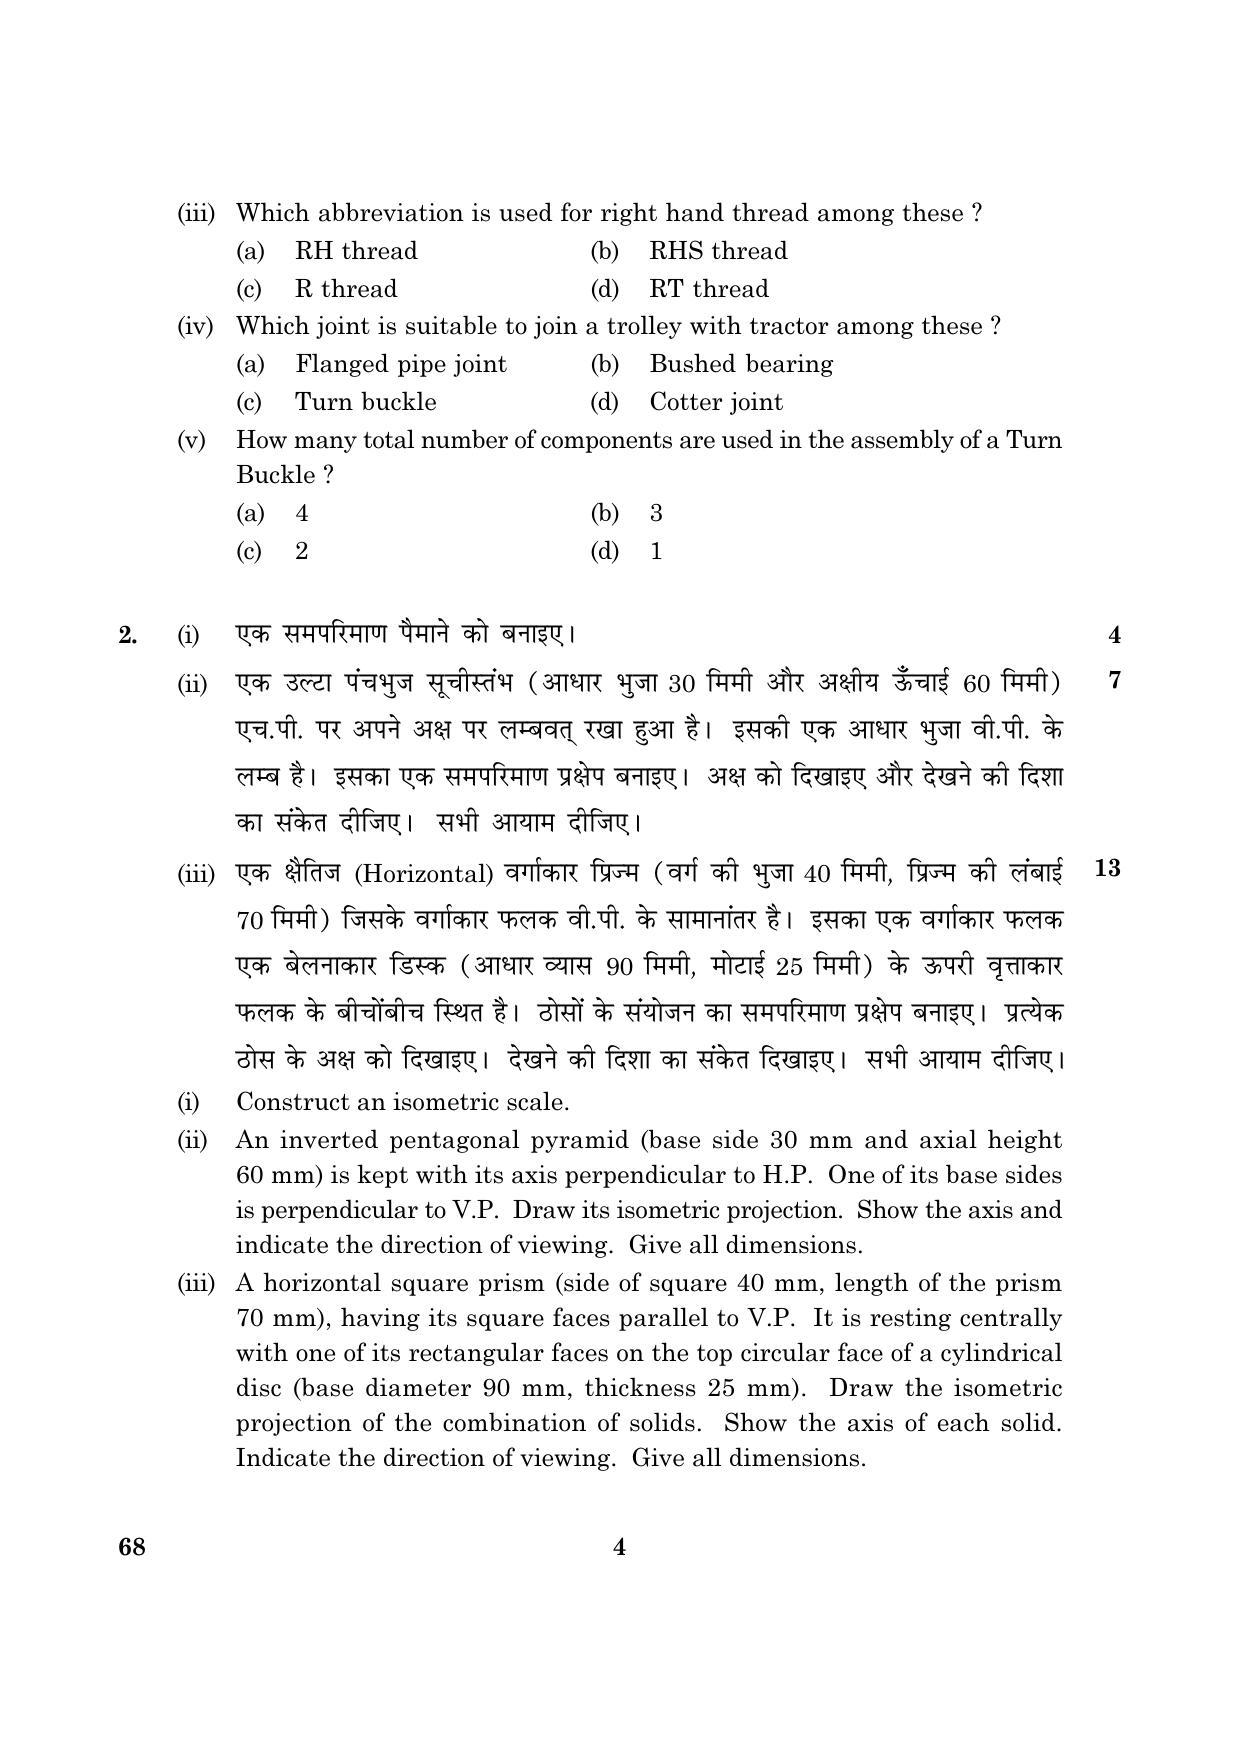 CBSE Class 12 068 Engineering Graphics 2016 Question Paper - Page 4